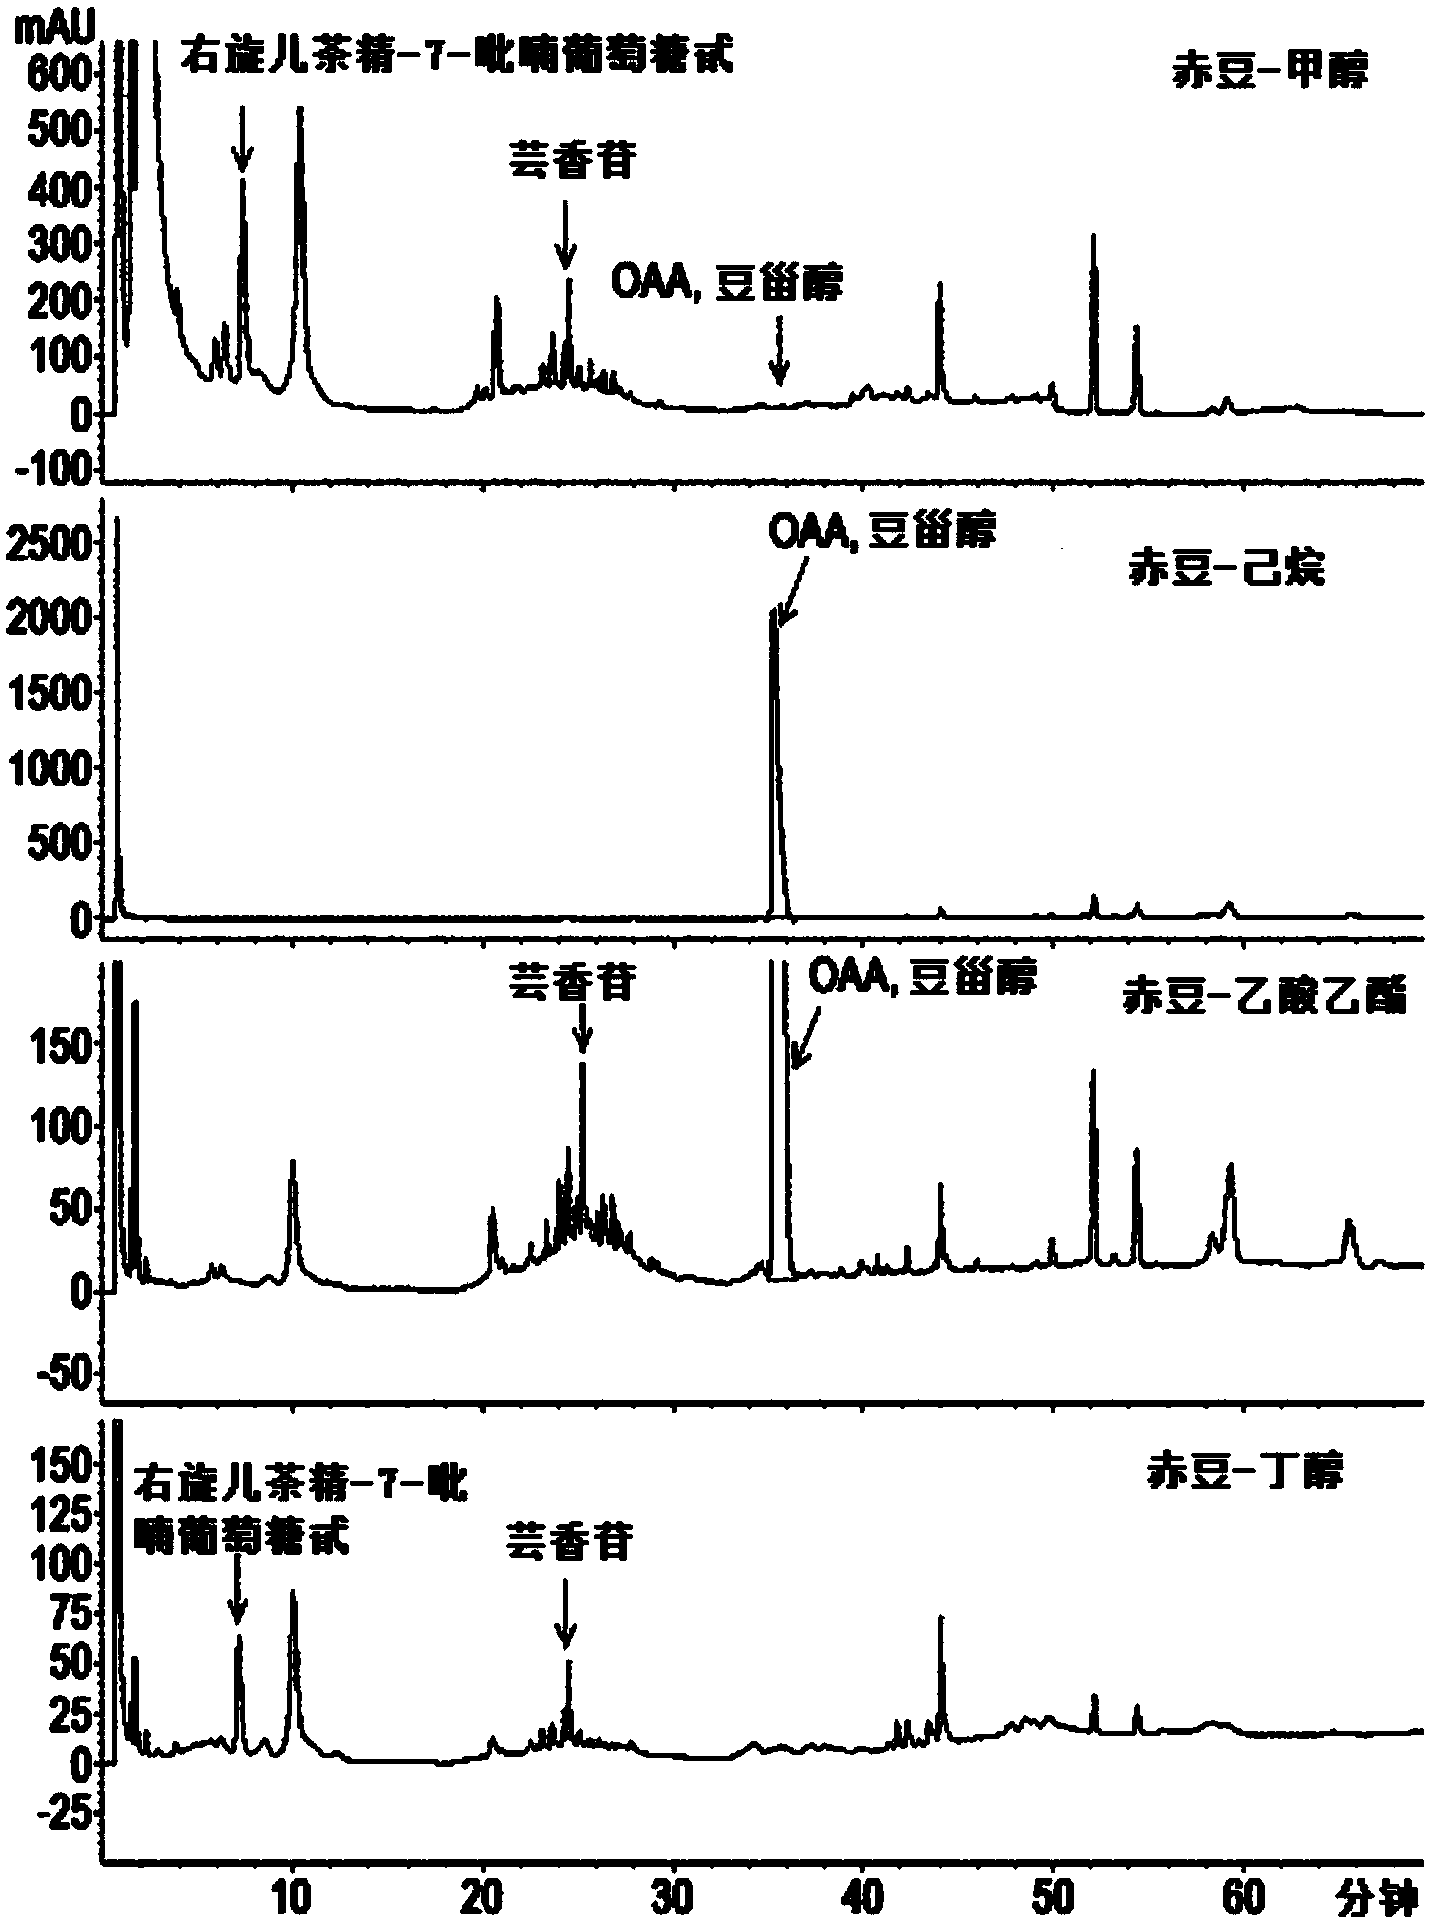 Pharmaceutical composition containing oleanolic acid acetate as an active ingredient for preventing or treating TLR- or IL-6-mediated diseases